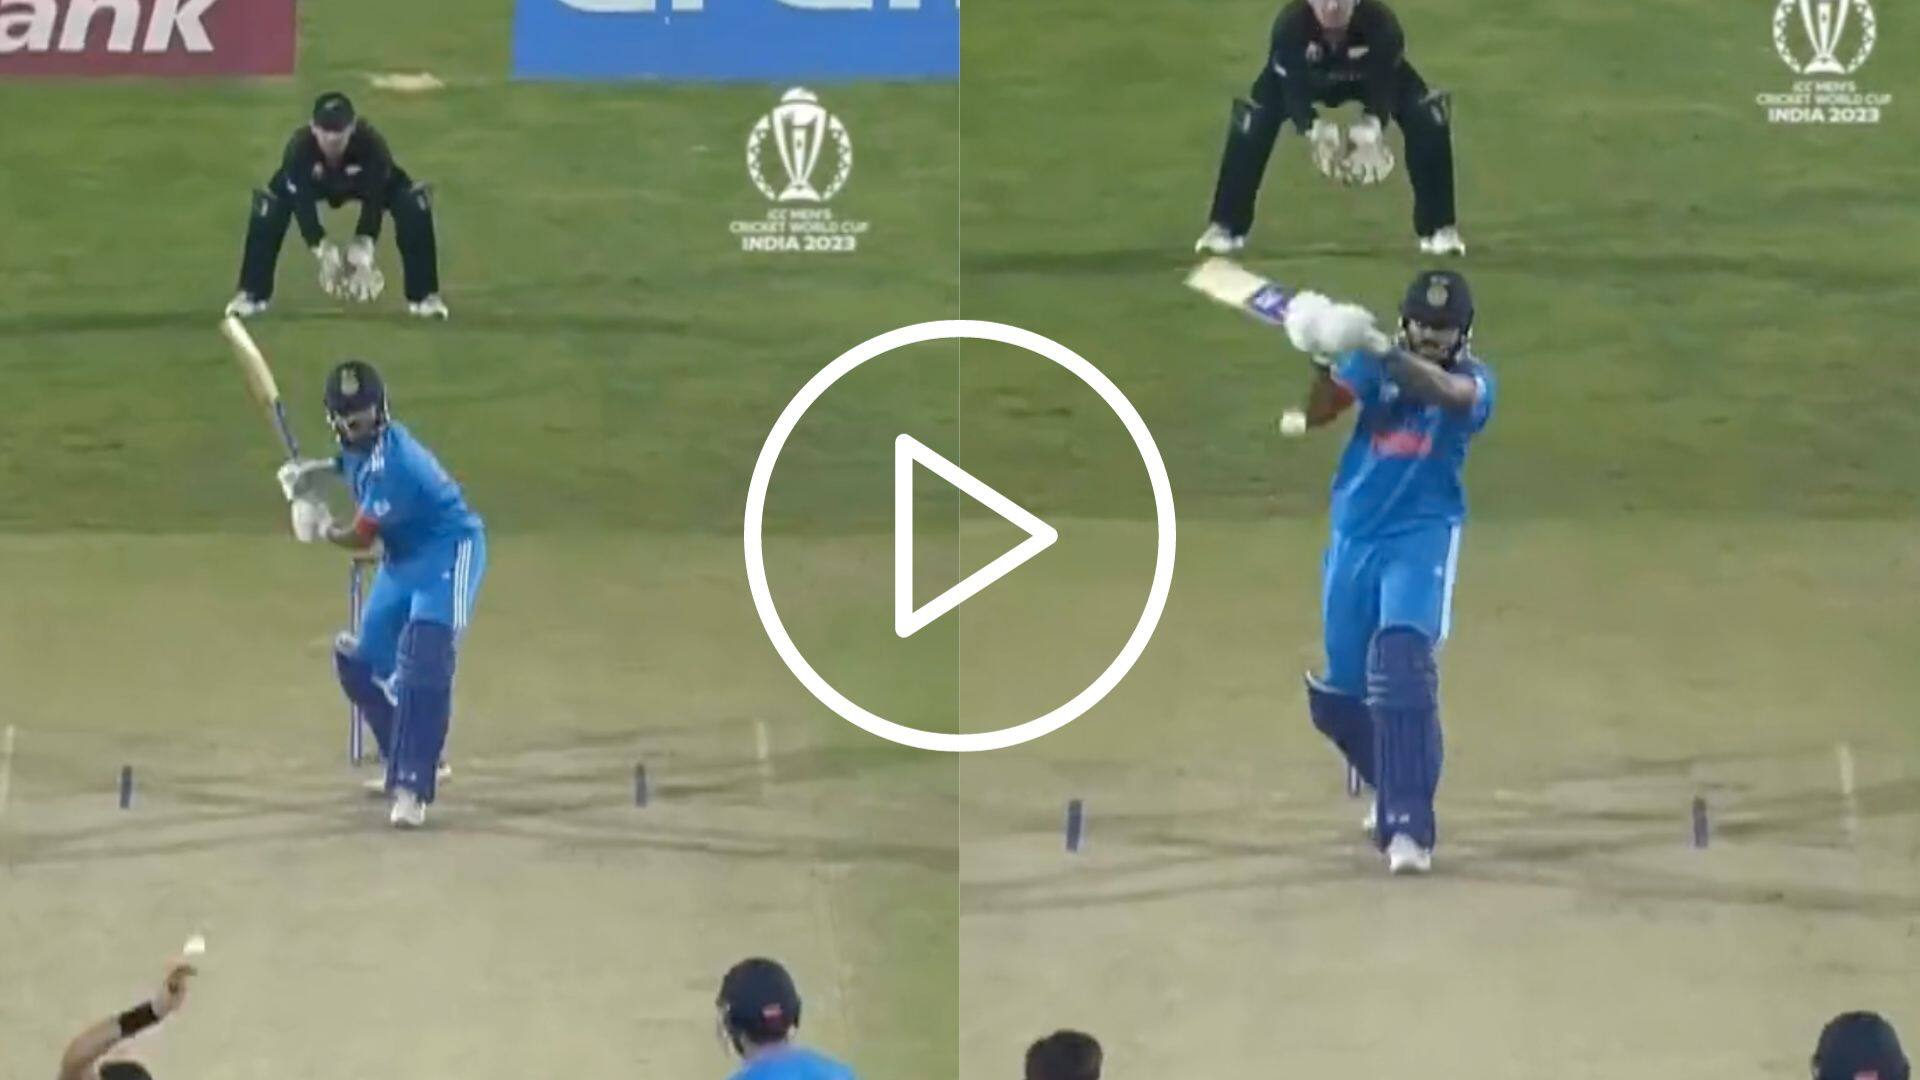 [Watch] Trent Boult's Deadly Bouncer Leads To Shreyas Iyer's Downfall